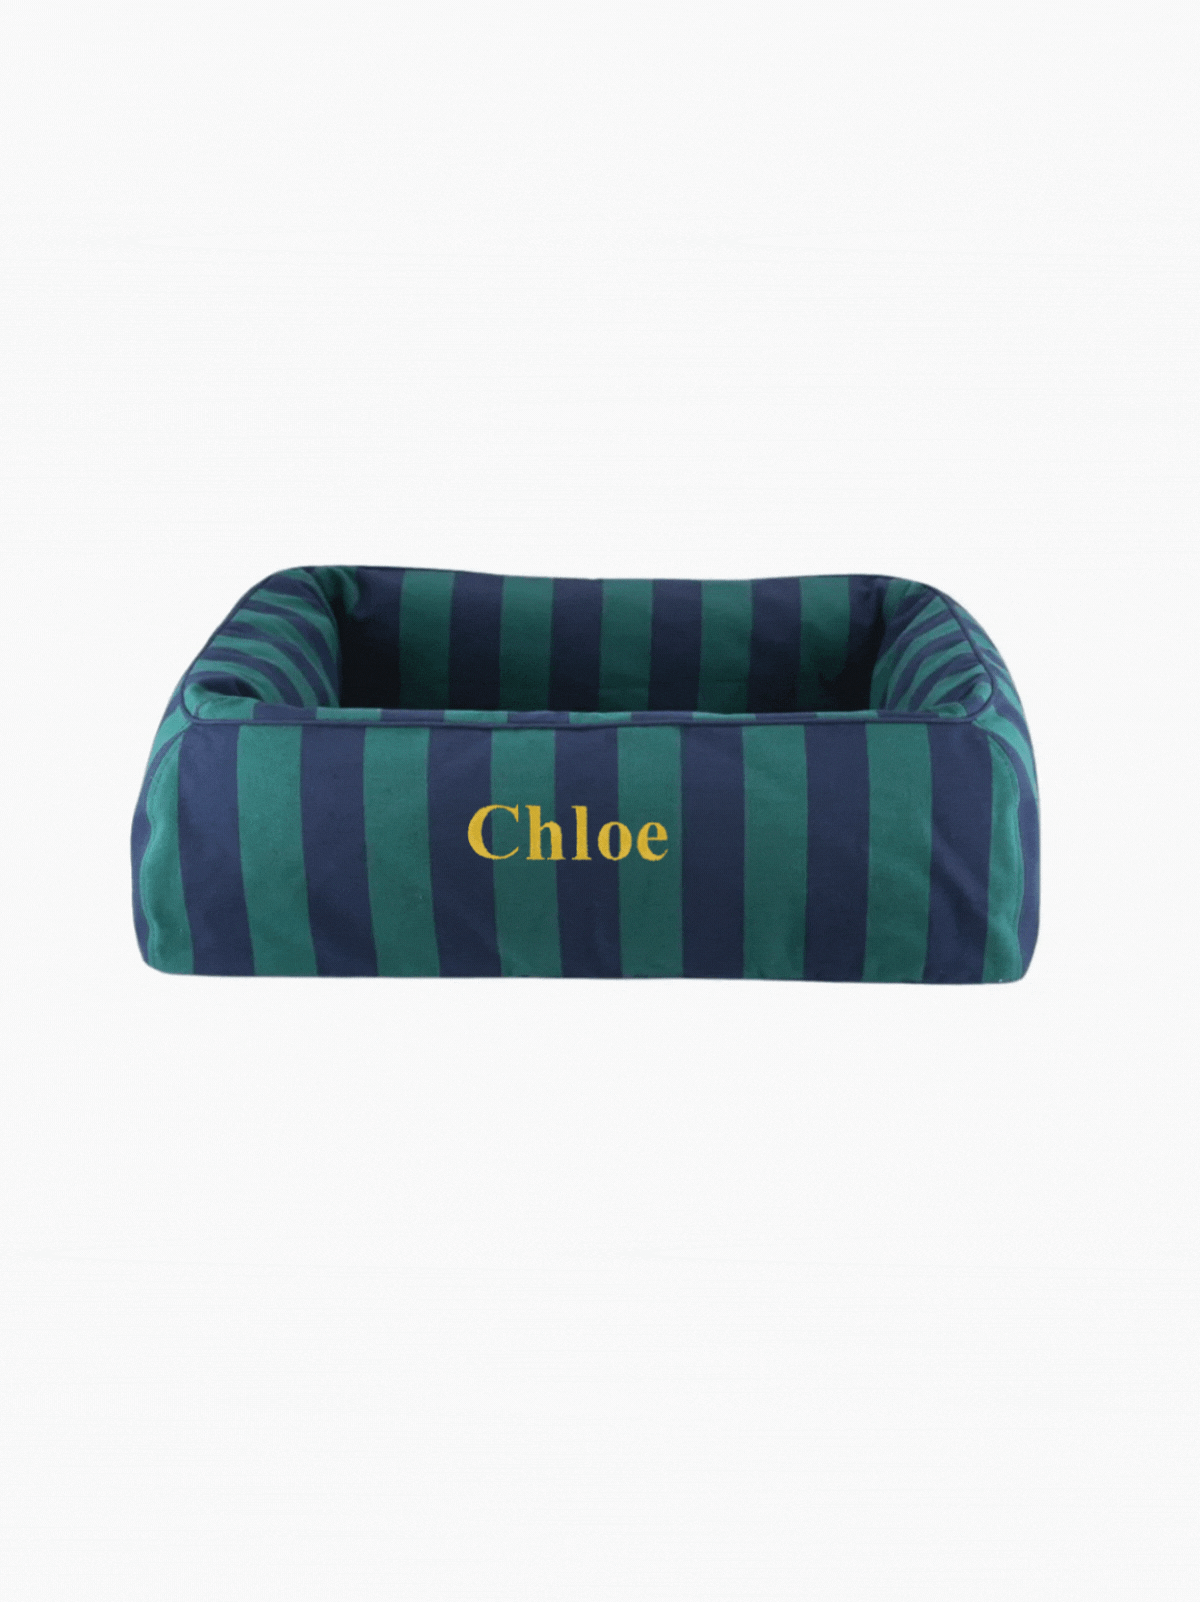 Striped Dog Bed